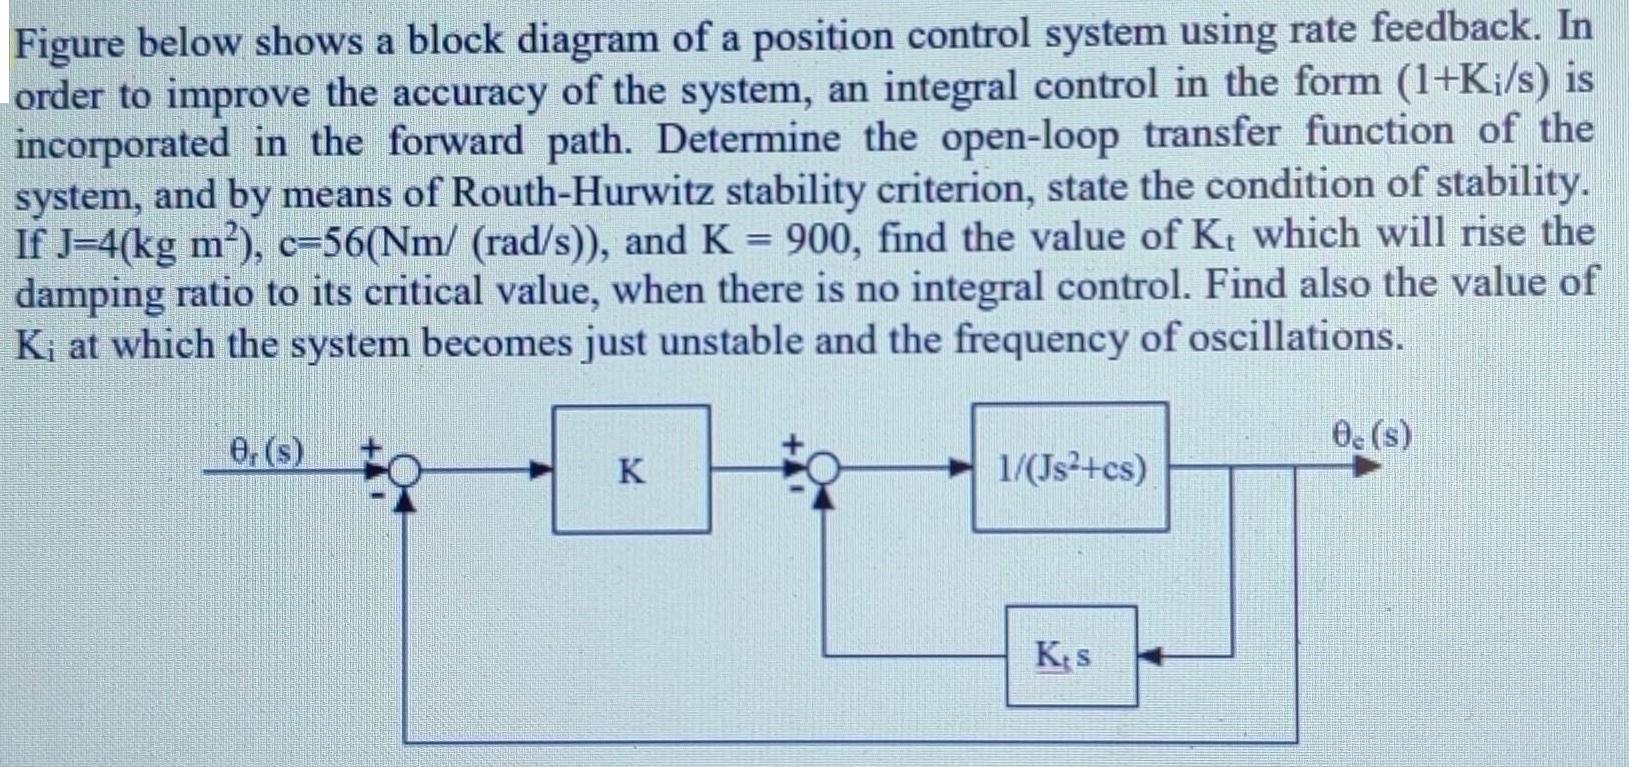 Figure below shows a block diagram of a position control system using rate feedback. In order to improve the